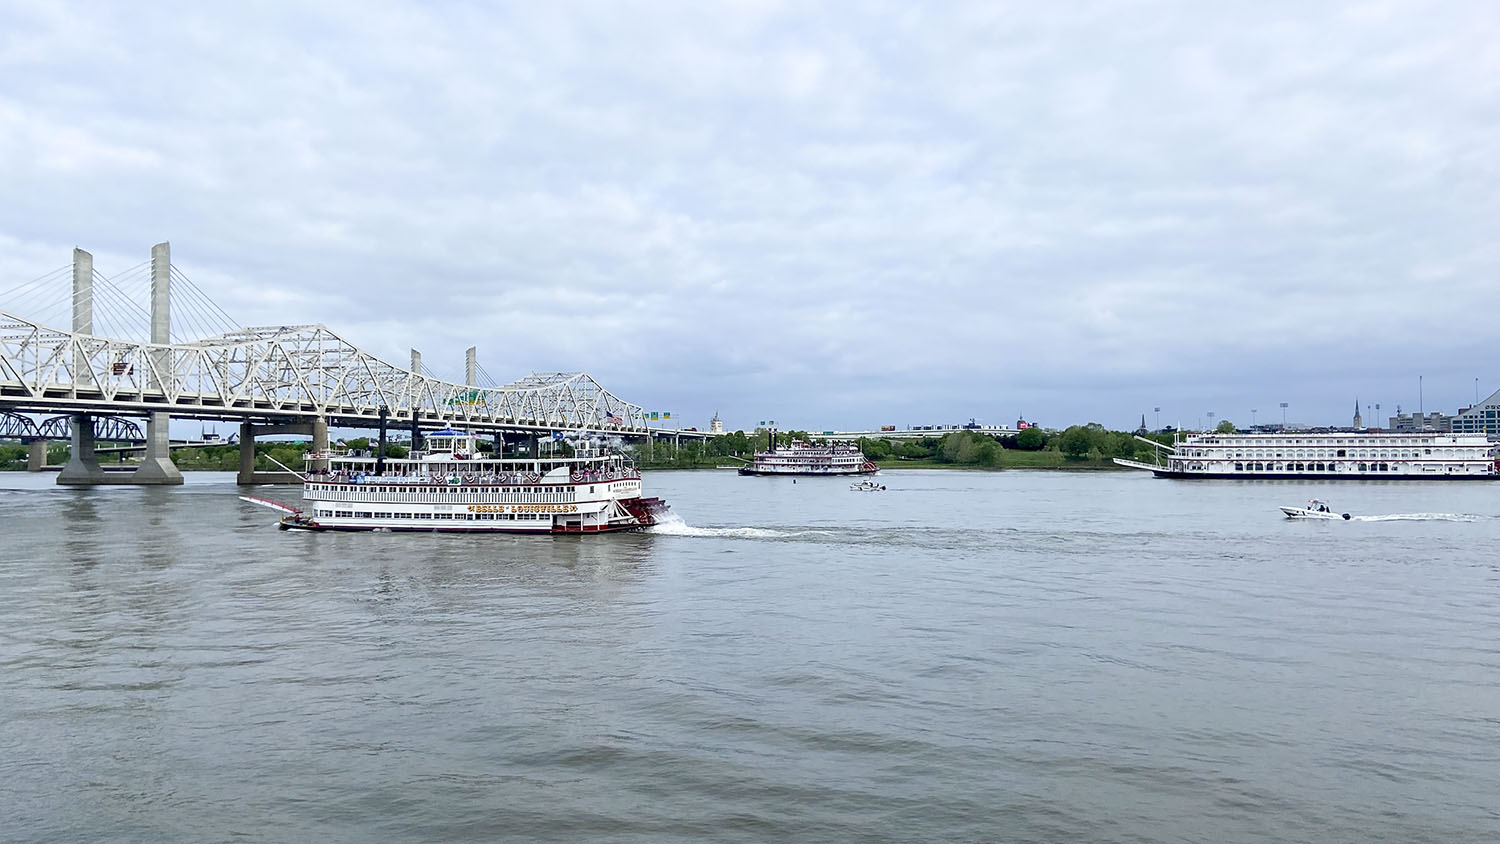 Action during the Great Steamboat Race at Louisville, Ky., May 4. (Photo courtesy of Belle of Louisville Riverboats)